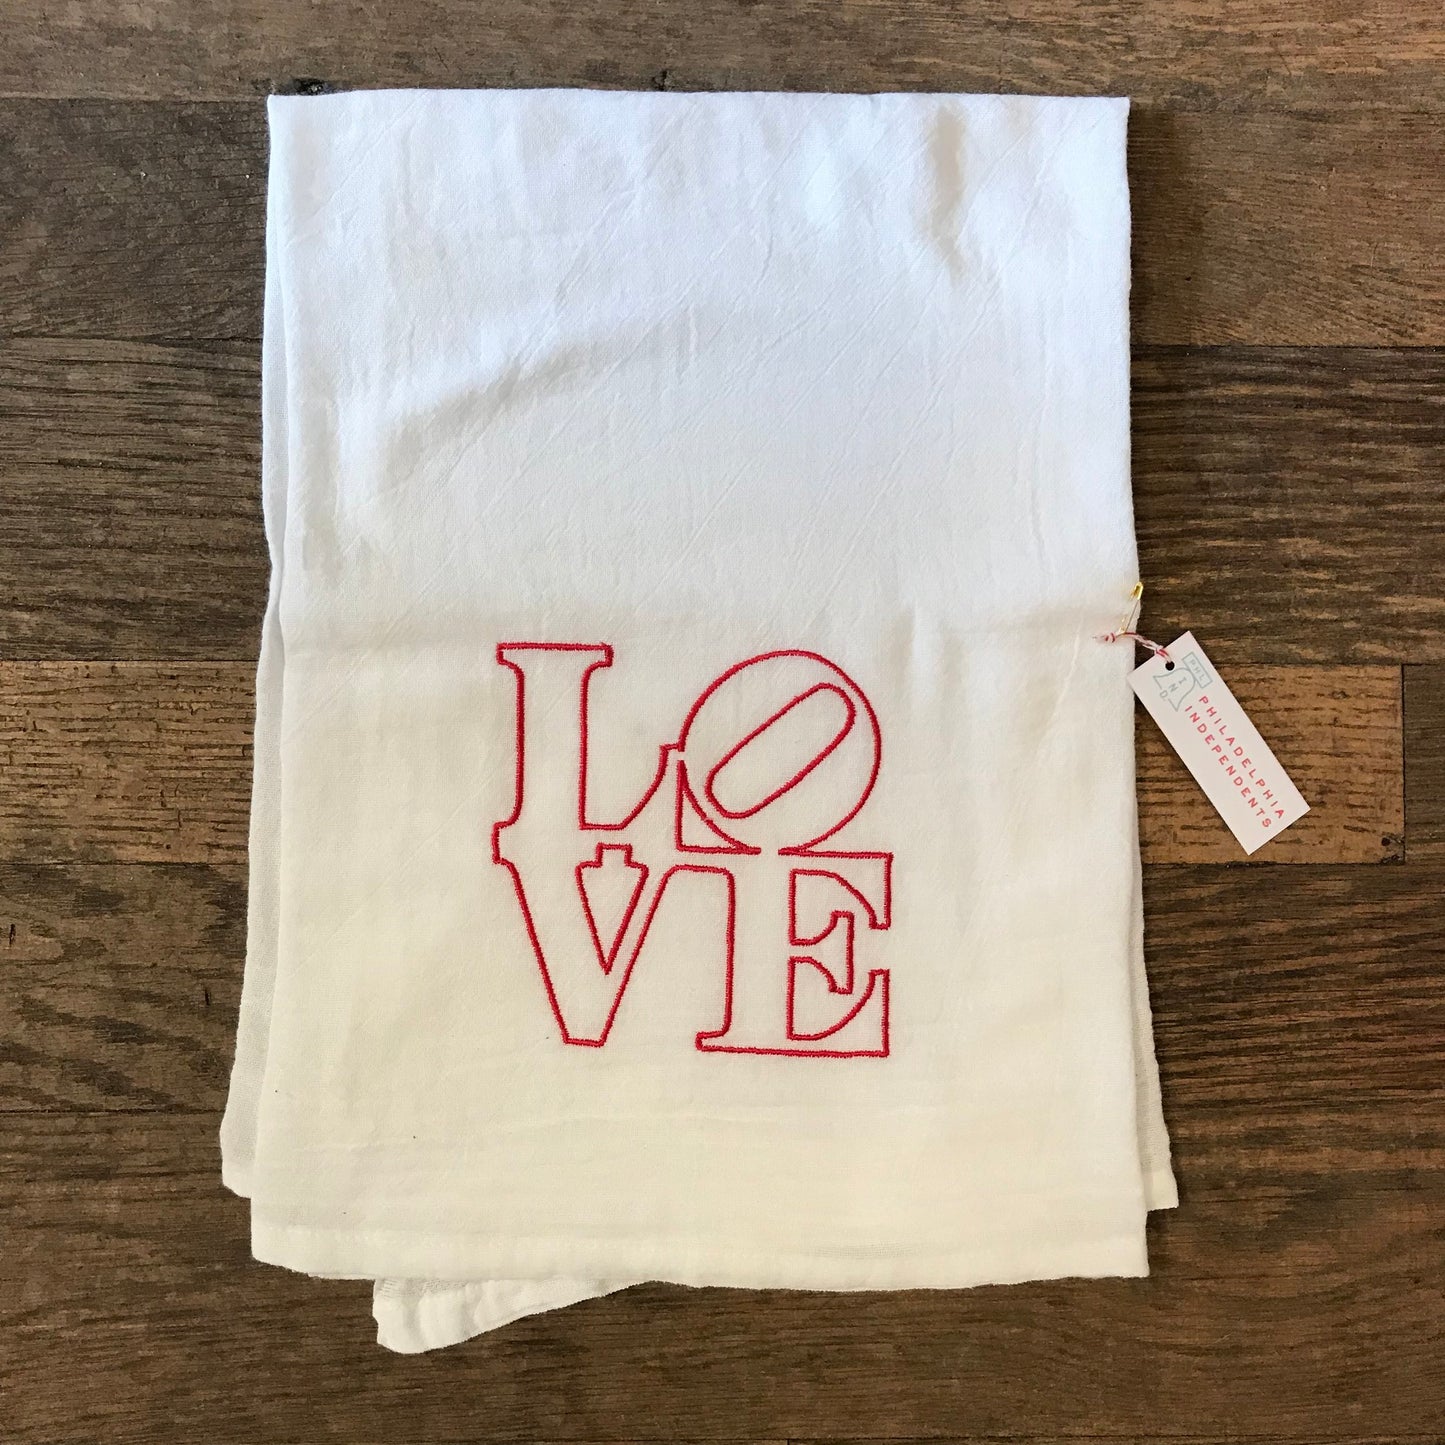 A white 100% cotton flour sack LOVE Tea Towel from The Pillow Works embroidered in red on a wooden surface with a price tag attached.